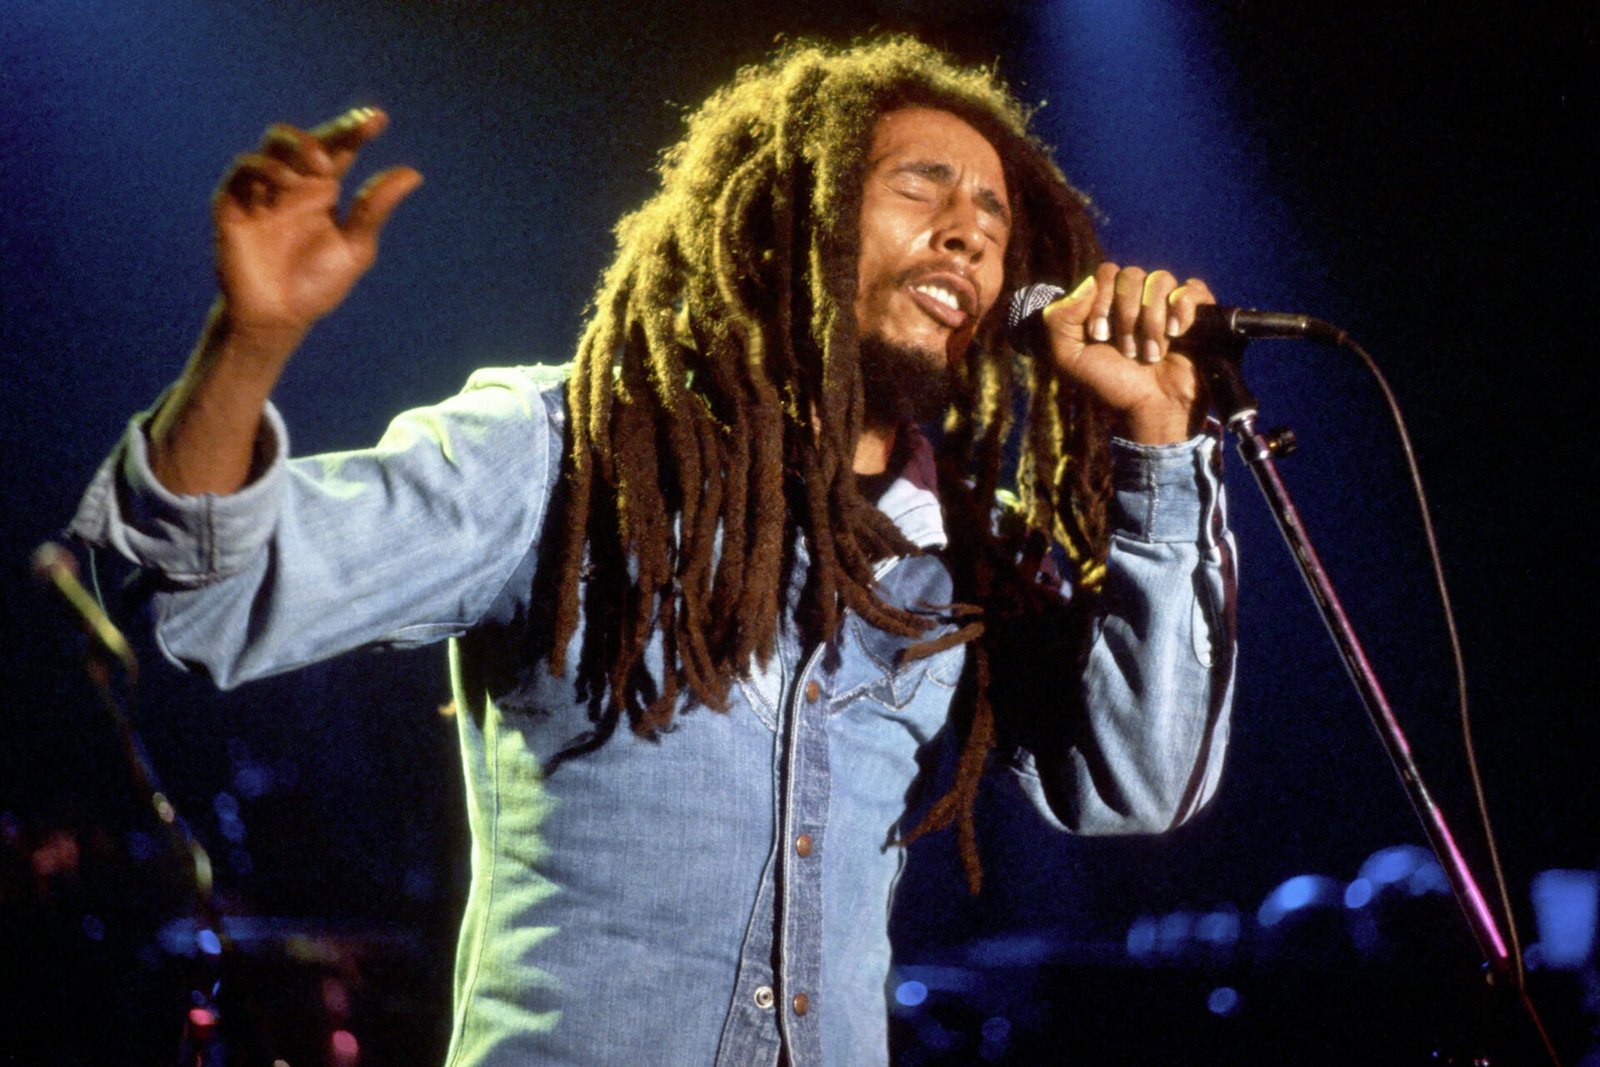 You are currently viewing Bob Marley’s “One Love” Collaboration With Fossil